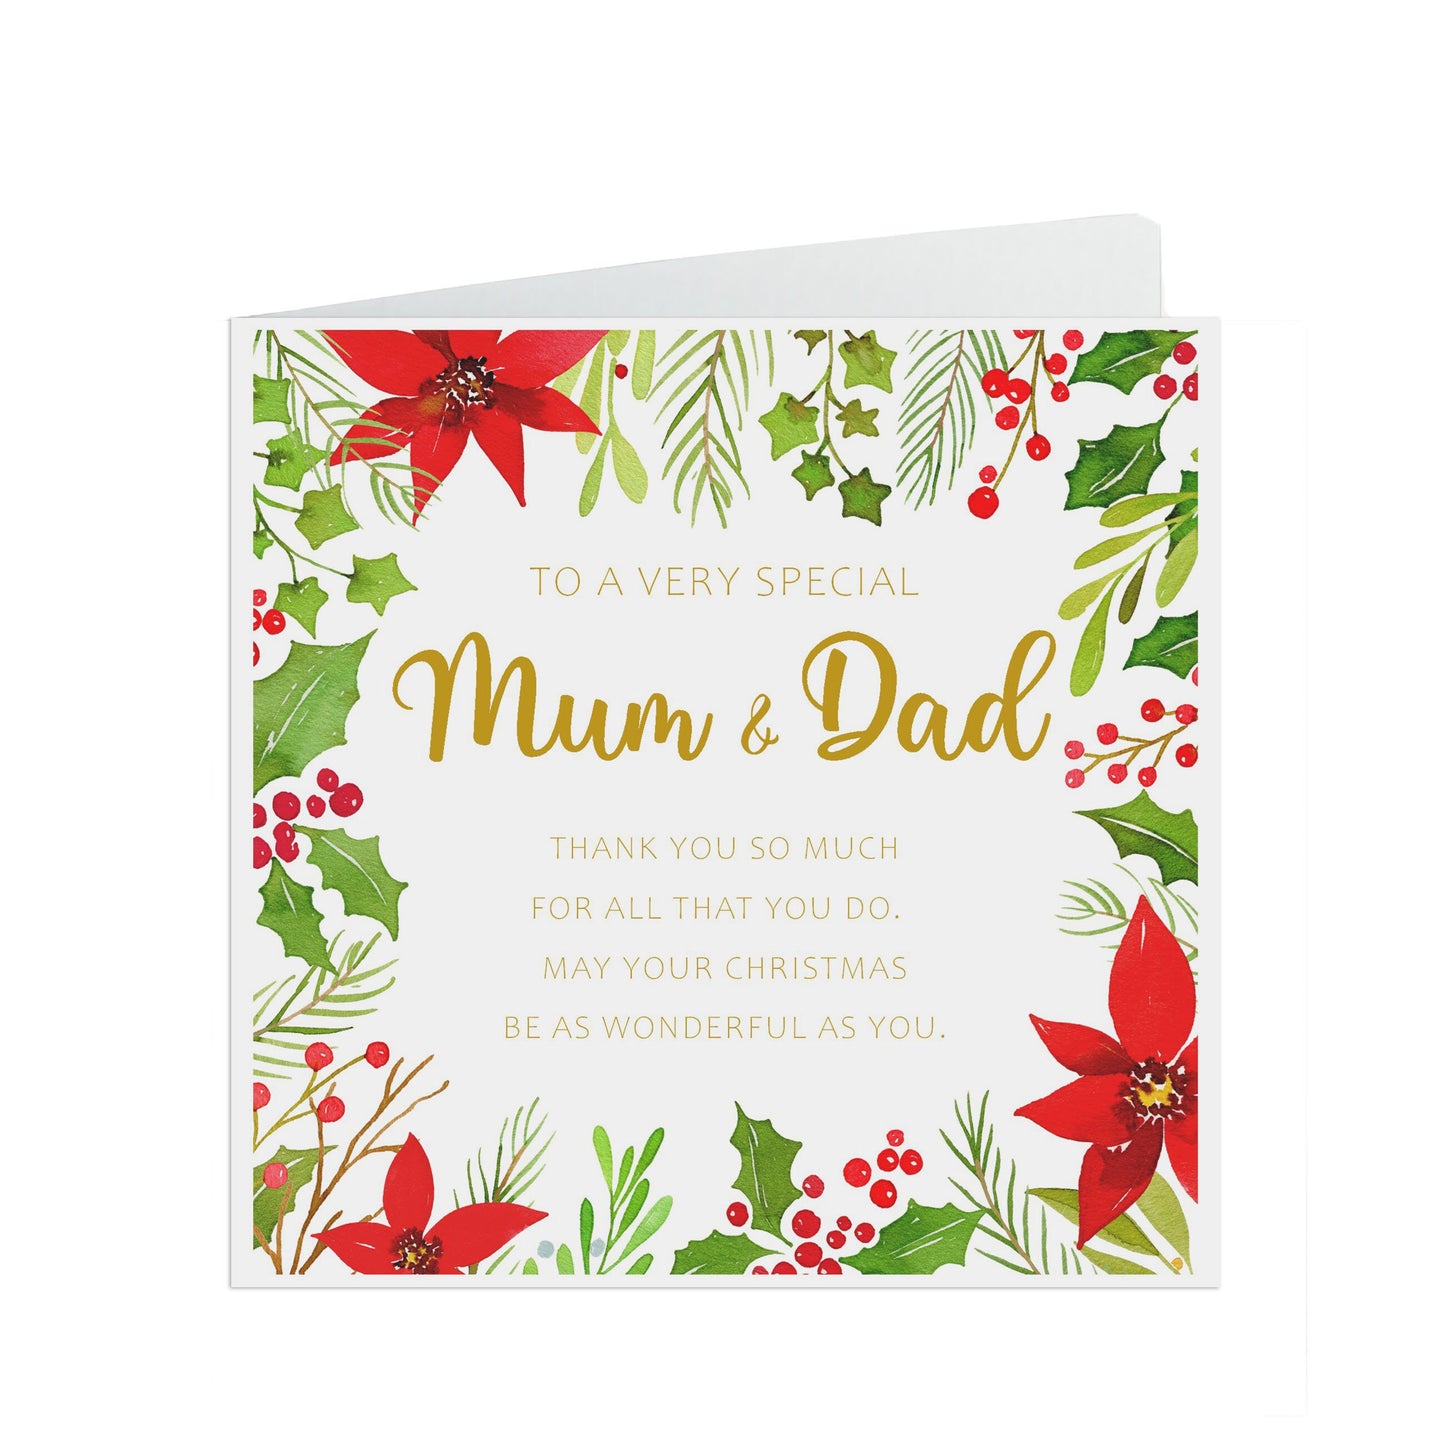 Traditional Christmas Card Mum & Dad, Christmas Card For Parents From Son Or Daughter